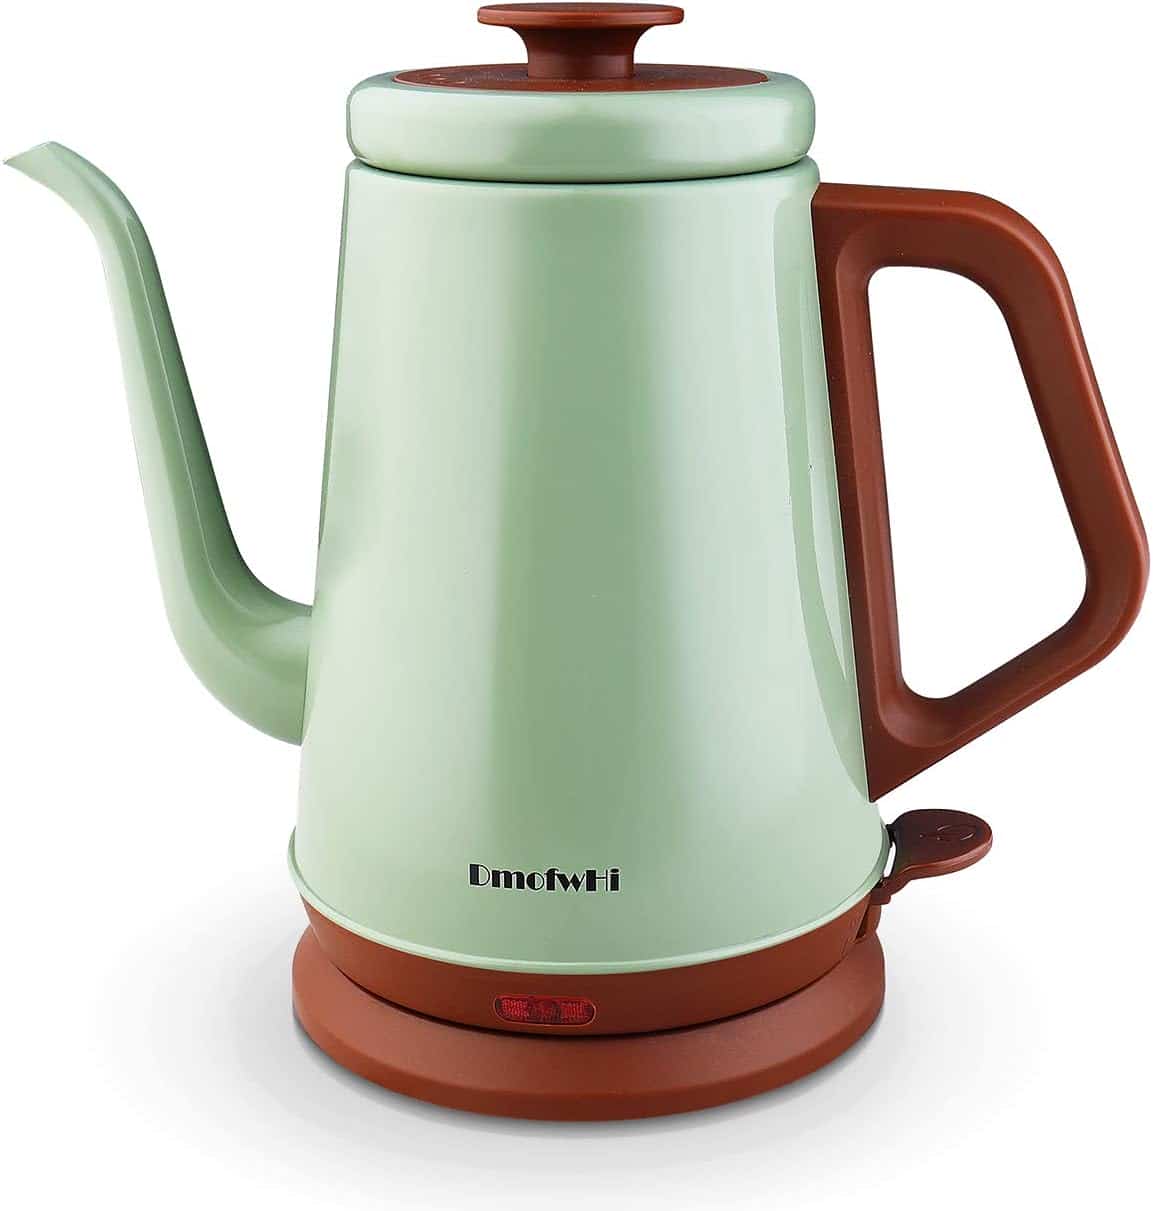 chaceef travel electric kettle instructions